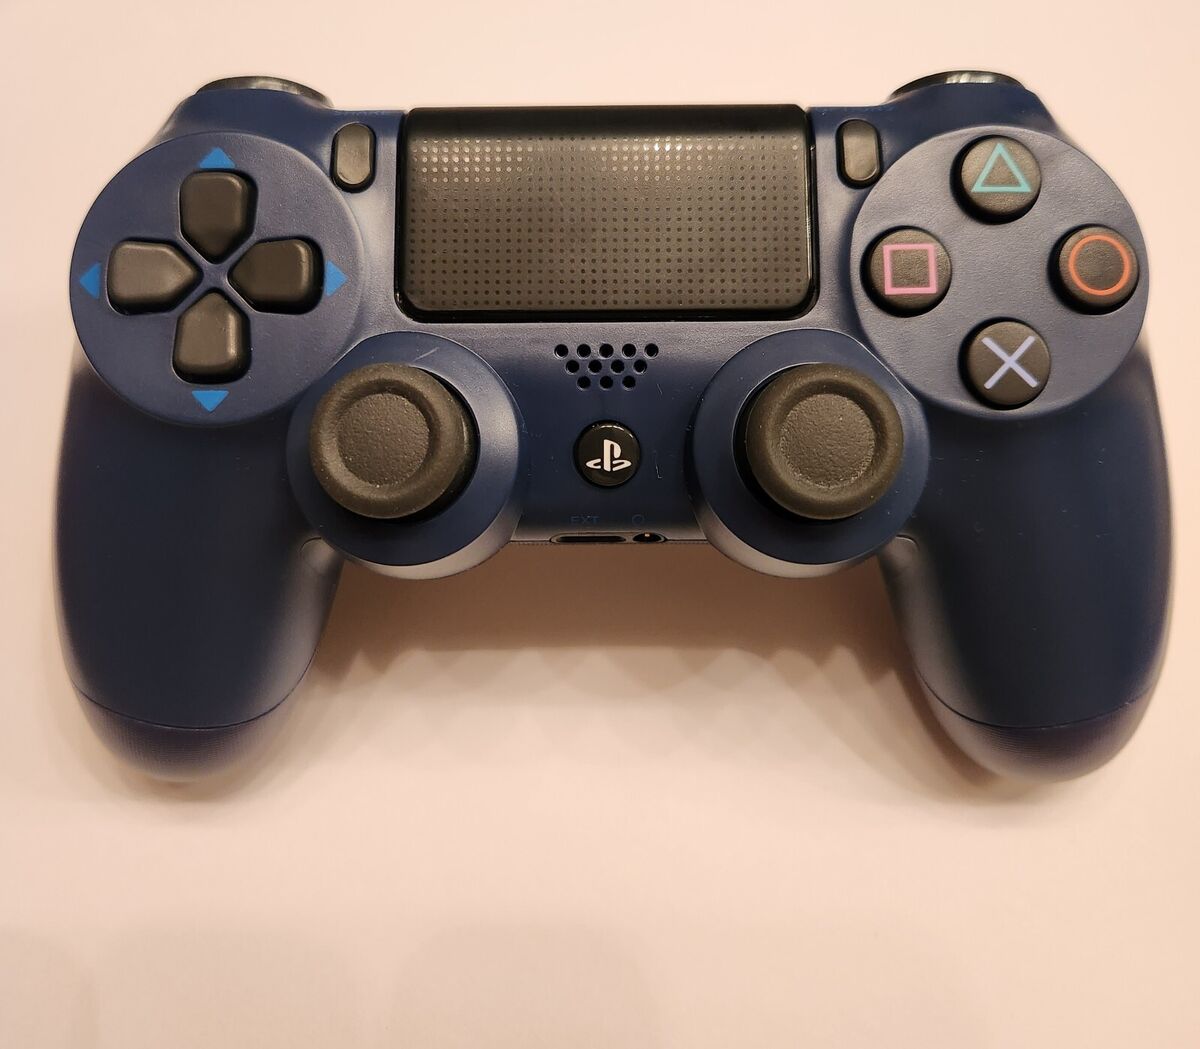 DualShock 4 Wireless Controller for PlayStation 4 – Midnight Blue